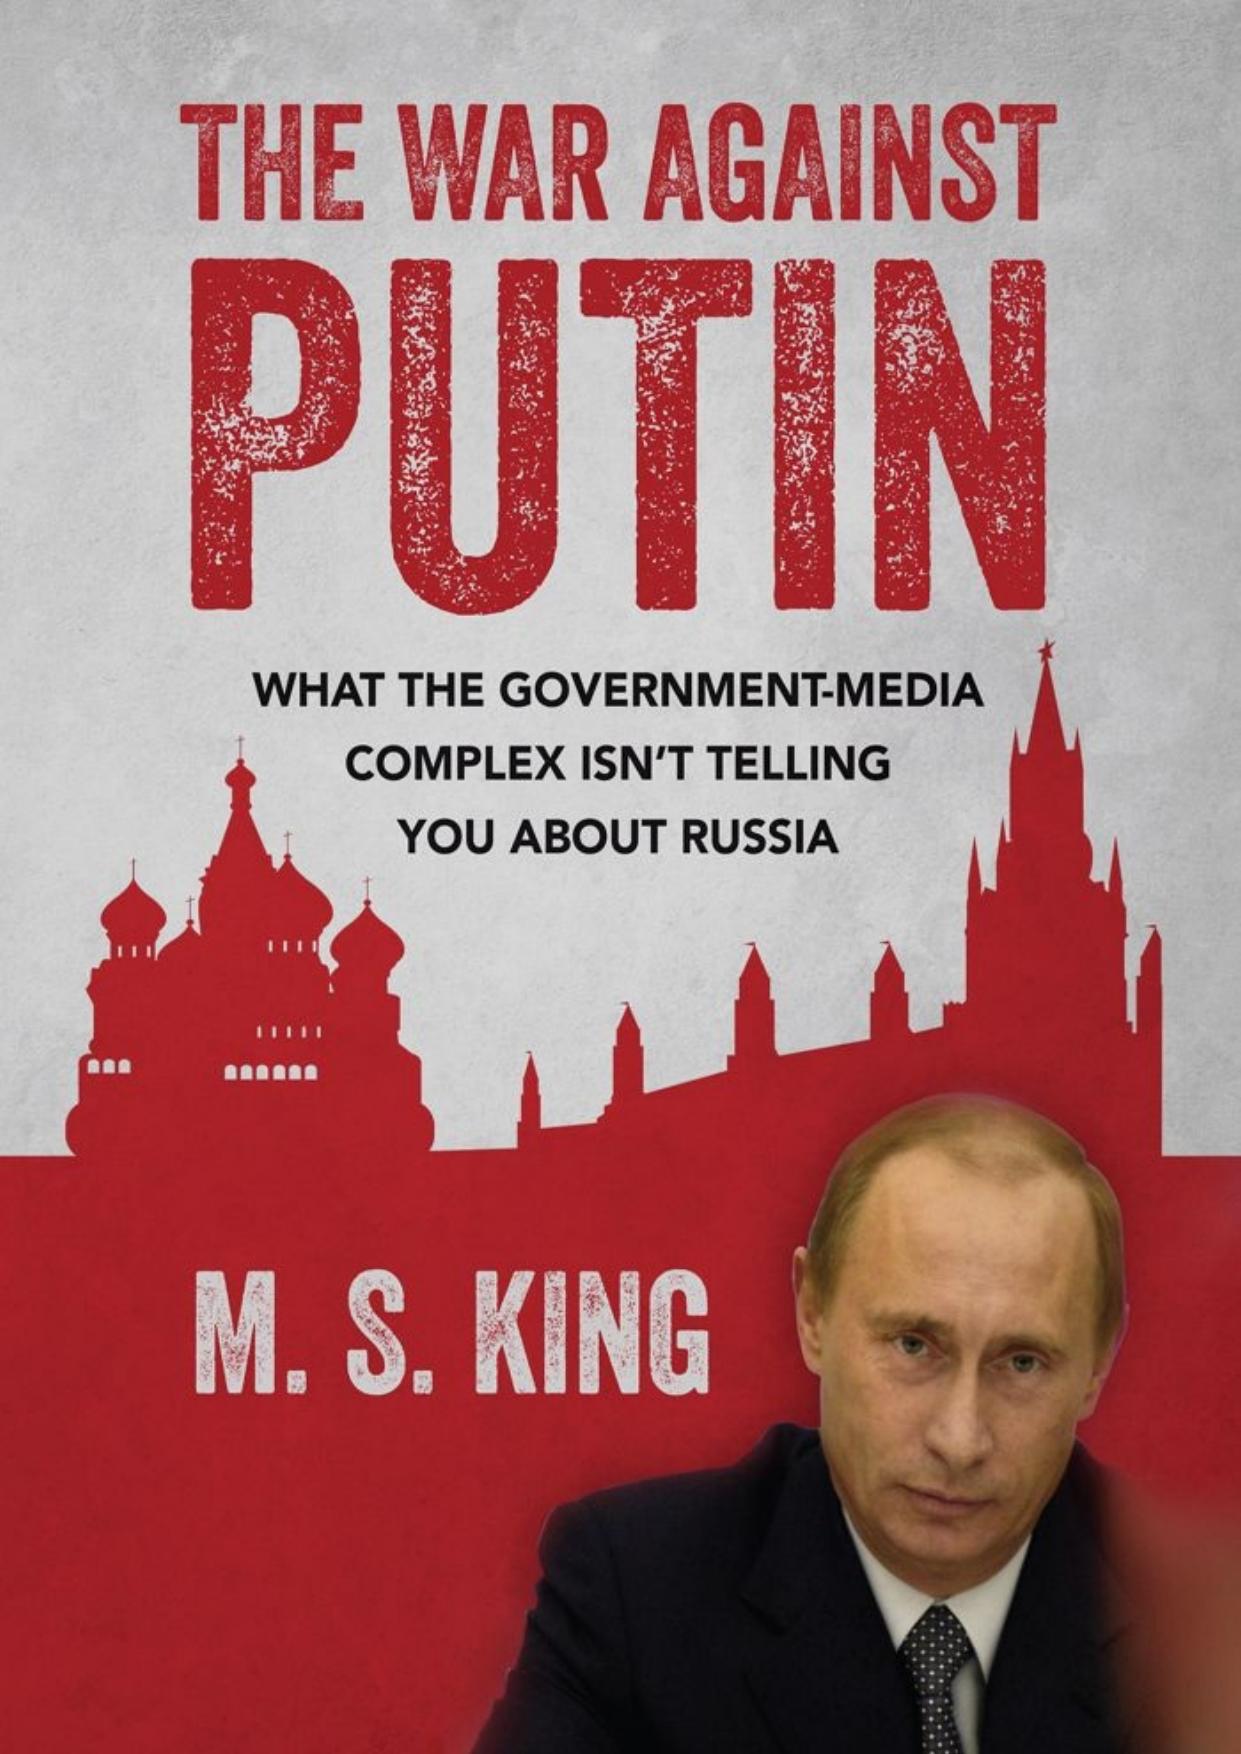 The War Against Putin: What the Government-Media Complex Isn't Telling You About Russia by M S King